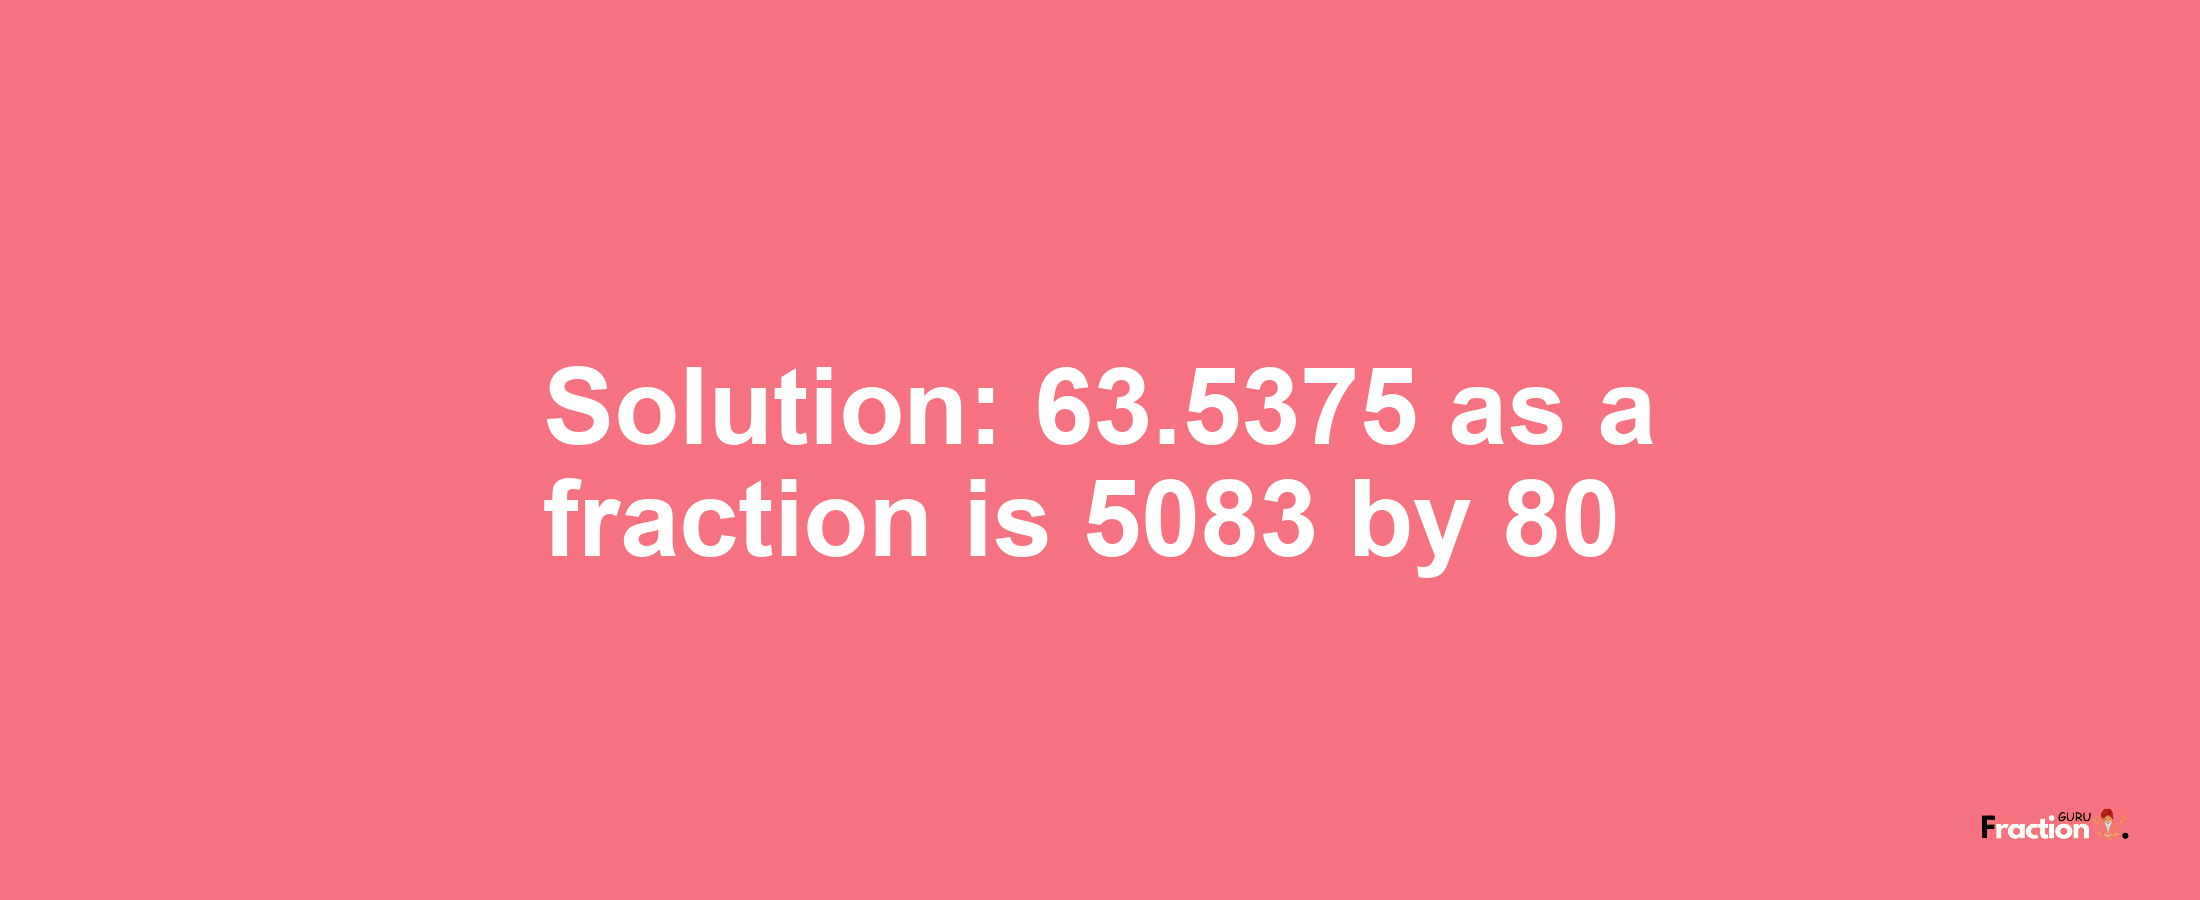 Solution:63.5375 as a fraction is 5083/80